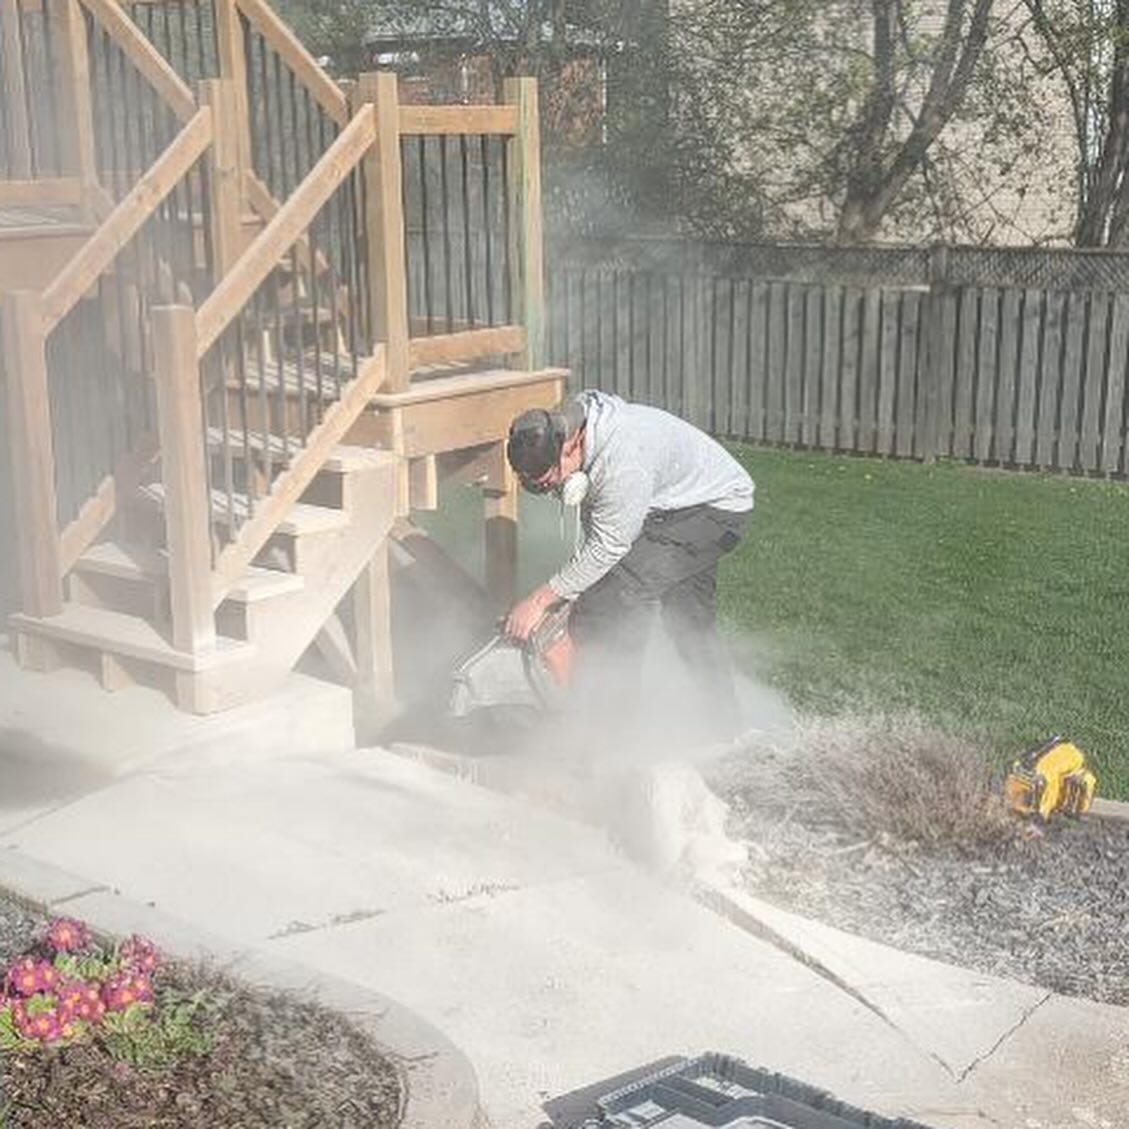 A pretty excellent concrete repair by our amazing team. 

Connect with us for your patio, deck or fence quote. Call or text Chris at 519-212-1296 
Check out our website.👆

#kwsmallbusiness #gohardcorporation #kitchener #kitchenerhomes #carpenter #co